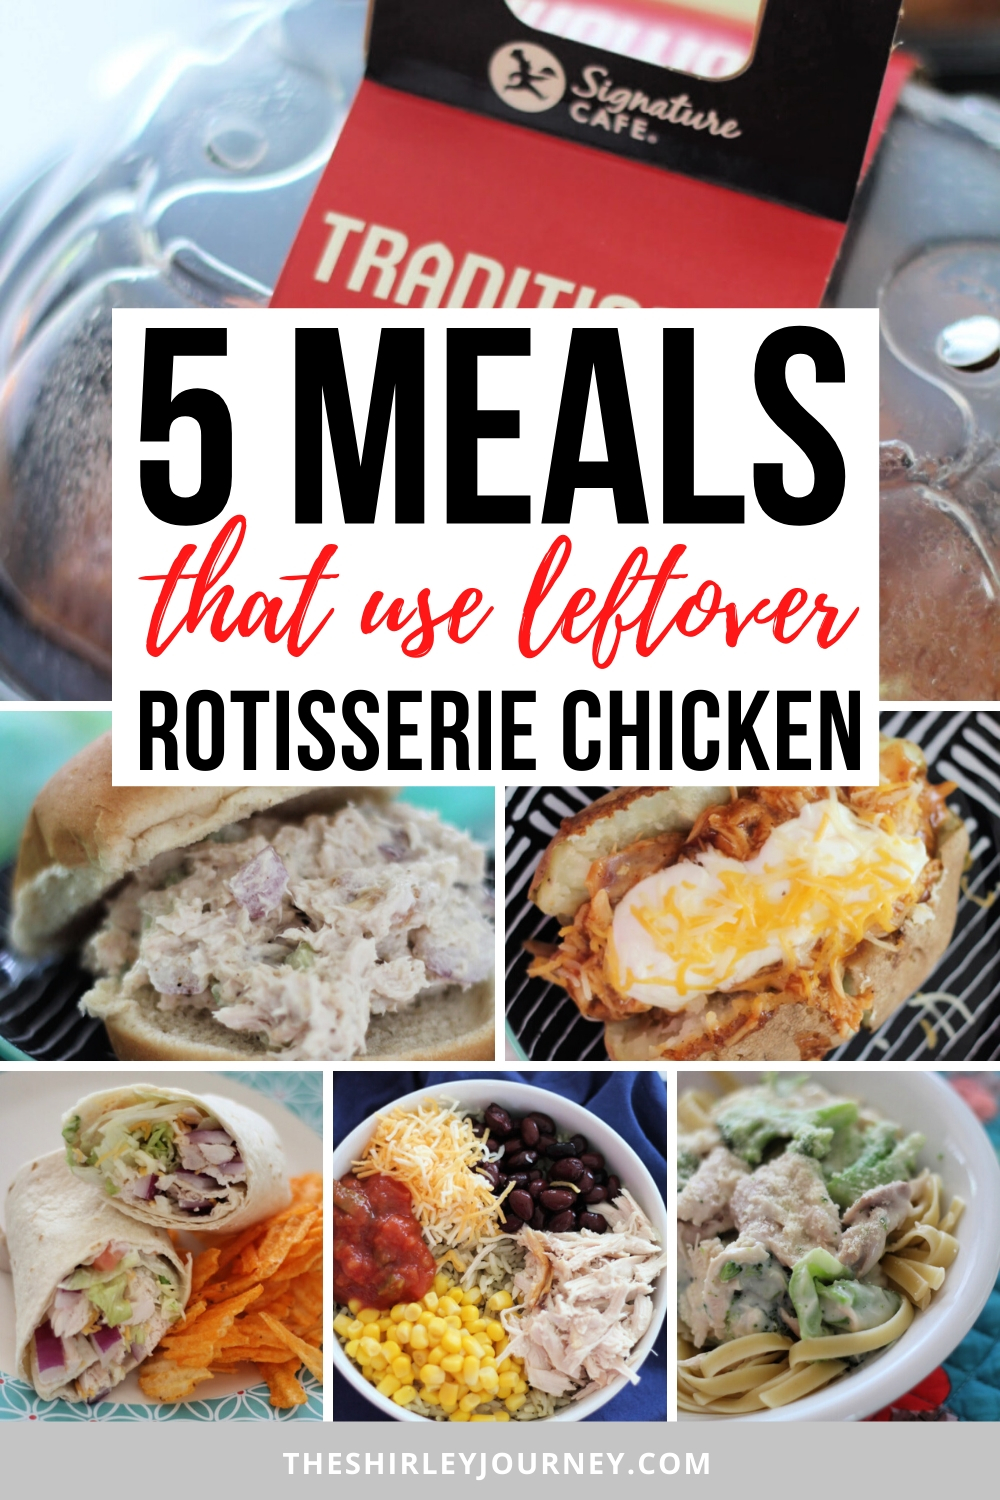 5 Meals that Use Leftover Rotisserie Chicken - The Shirley Journey